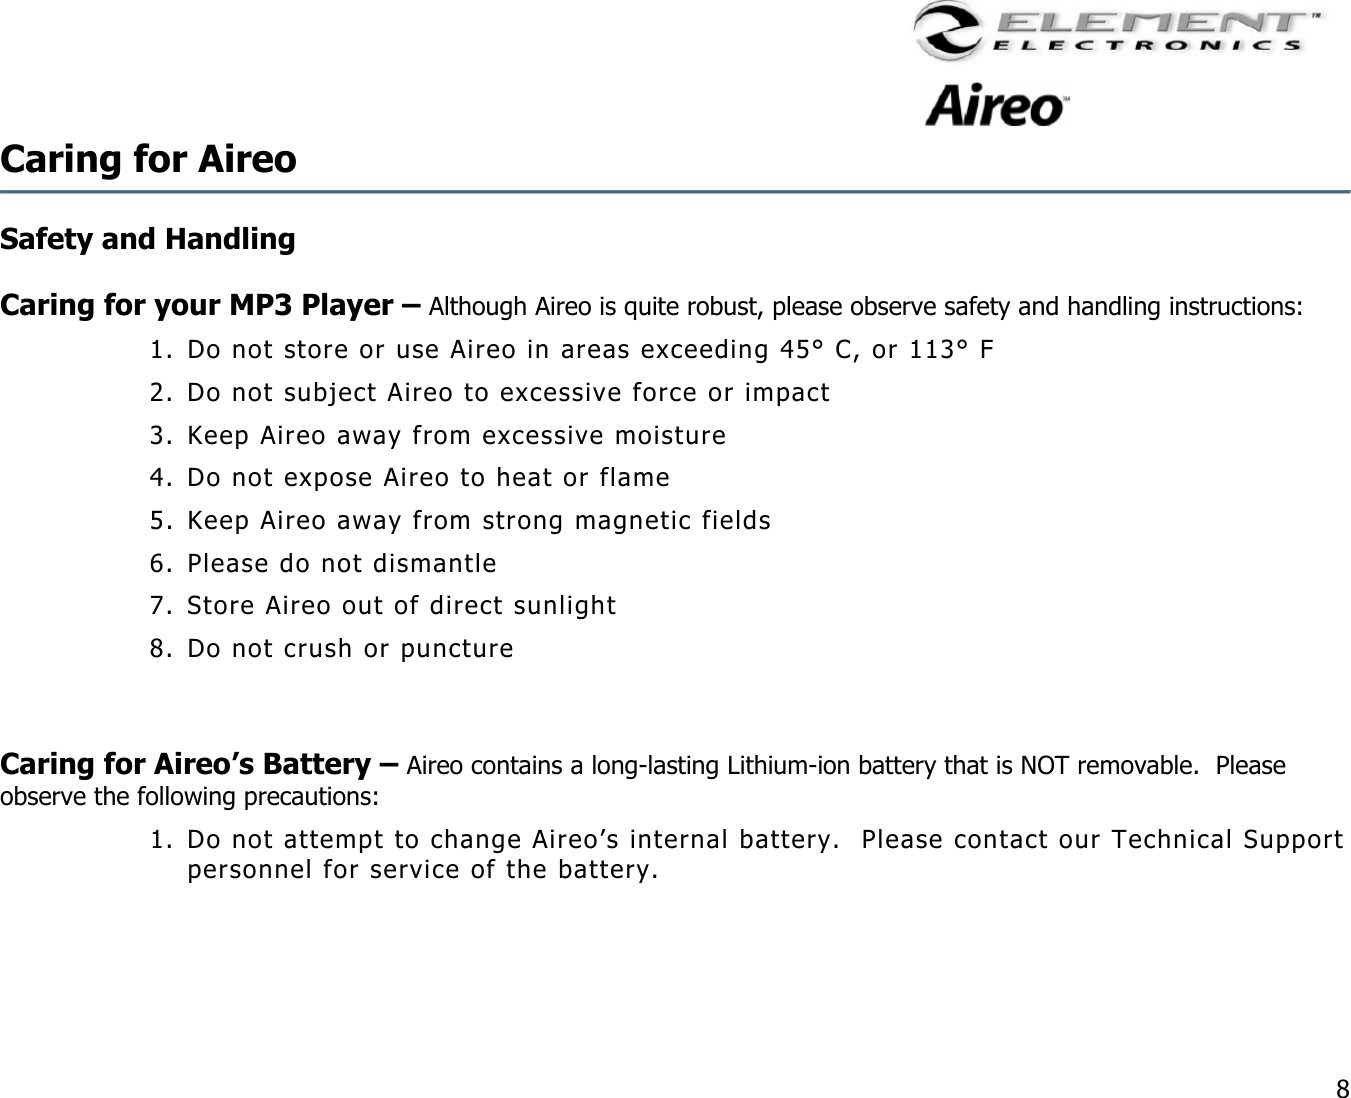                                                                                    8 Caring for Aireo  Safety and Handling   Caring for your MP3 Player – Although Aireo is quite robust, please observe safety and handling instructions: 1. Do not store or use Aireo in areas exceeding 45° C, or 113° F 2. Do not subject Aireo to excessive force or impact 3. Keep Aireo away from excessive moisture 4. Do not expose Aireo to heat or flame 5. Keep Aireo away from strong magnetic fields 6. Please do not dismantle 7. Store Aireo out of direct sunlight 8. Do not crush or puncture    Caring for Aireo’s Battery – Aireo contains a long-lasting Lithium-ion battery that is NOT removable.  Please observe the following precautions: 1. Do not attempt to change Aireo’s internal battery.  Please contact our Technical Support personnel for service of the battery.   